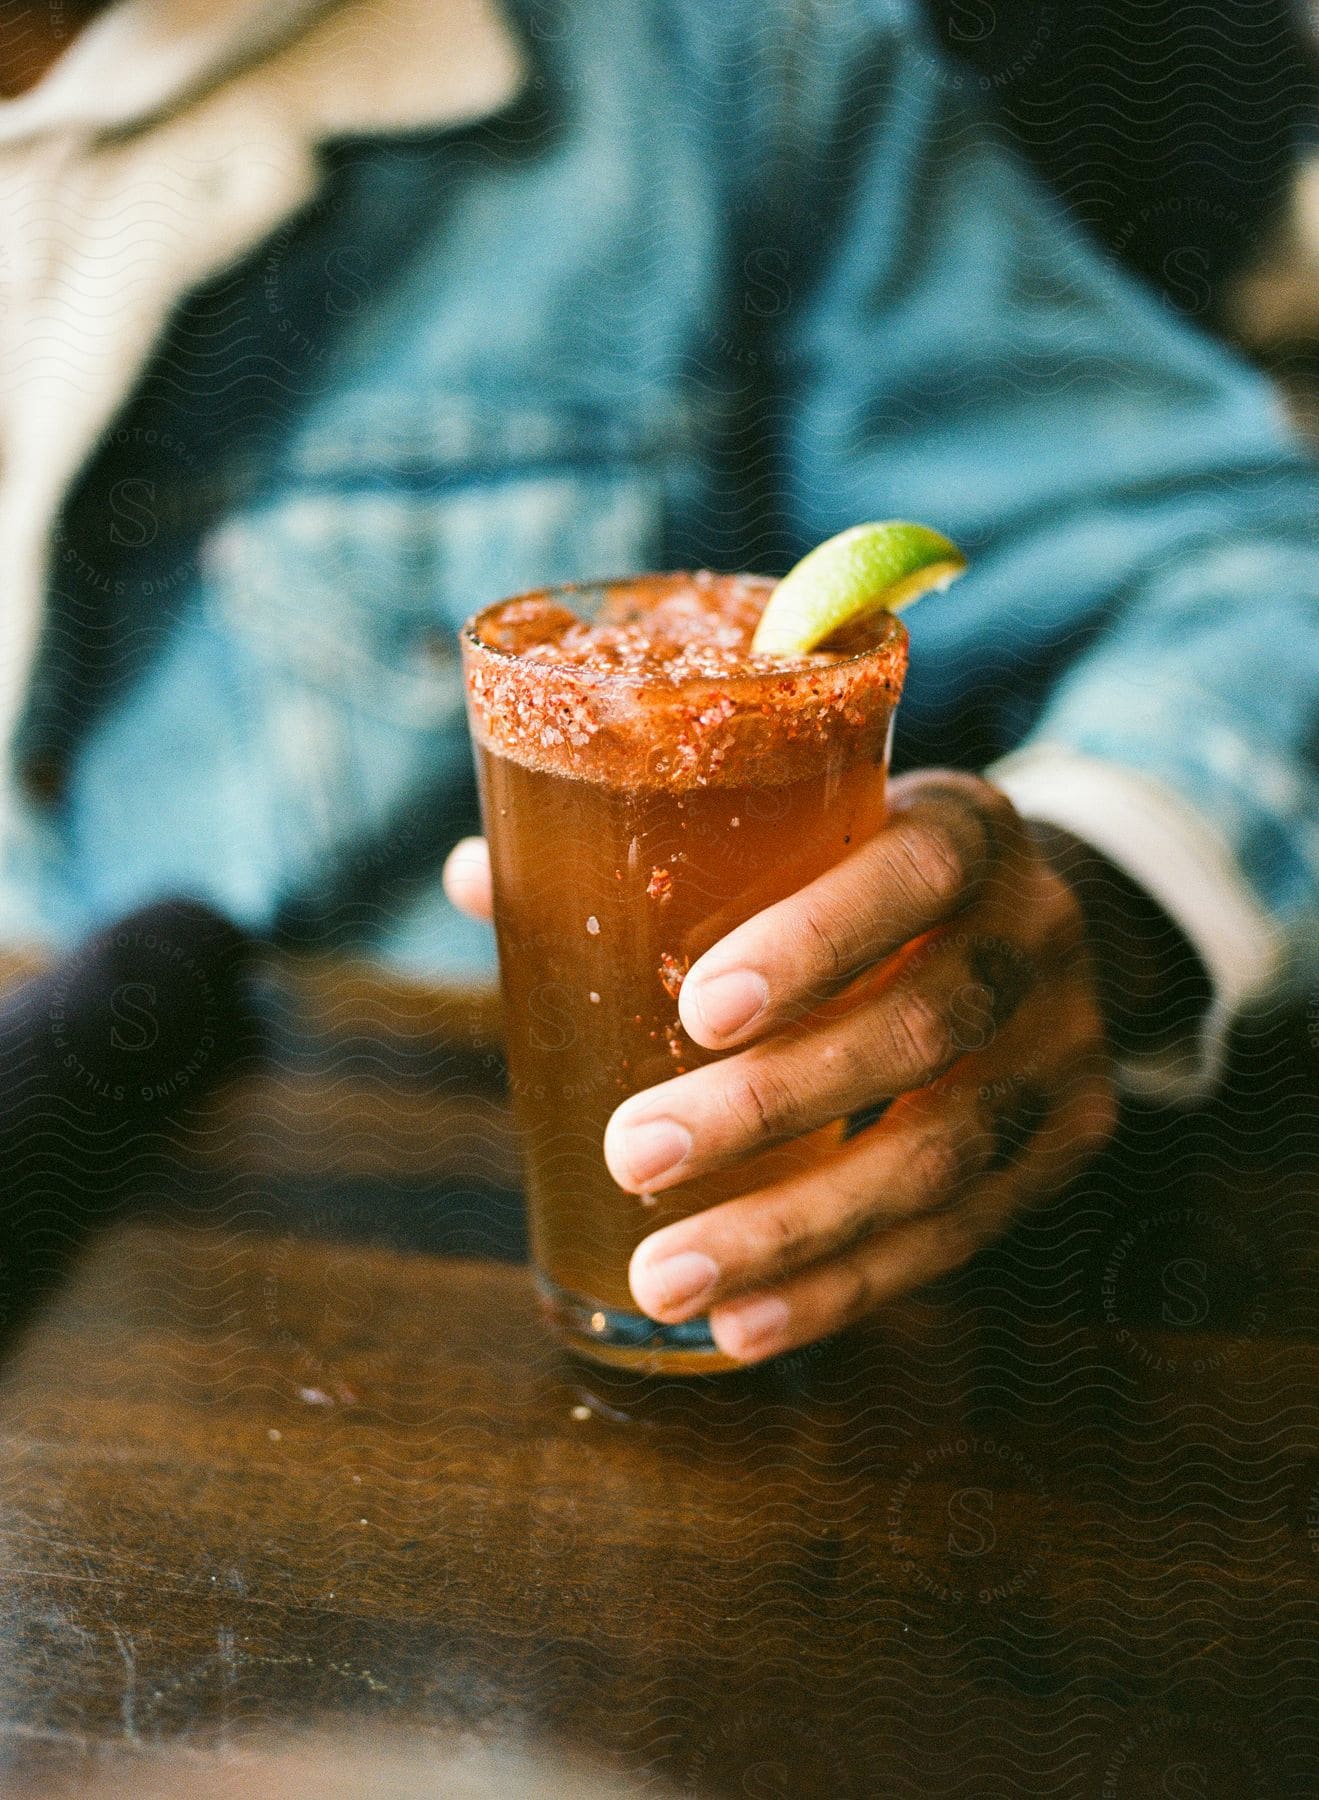 Man holding a glass rimmed with spice and garnished with lime, filled with a reddish beverage.